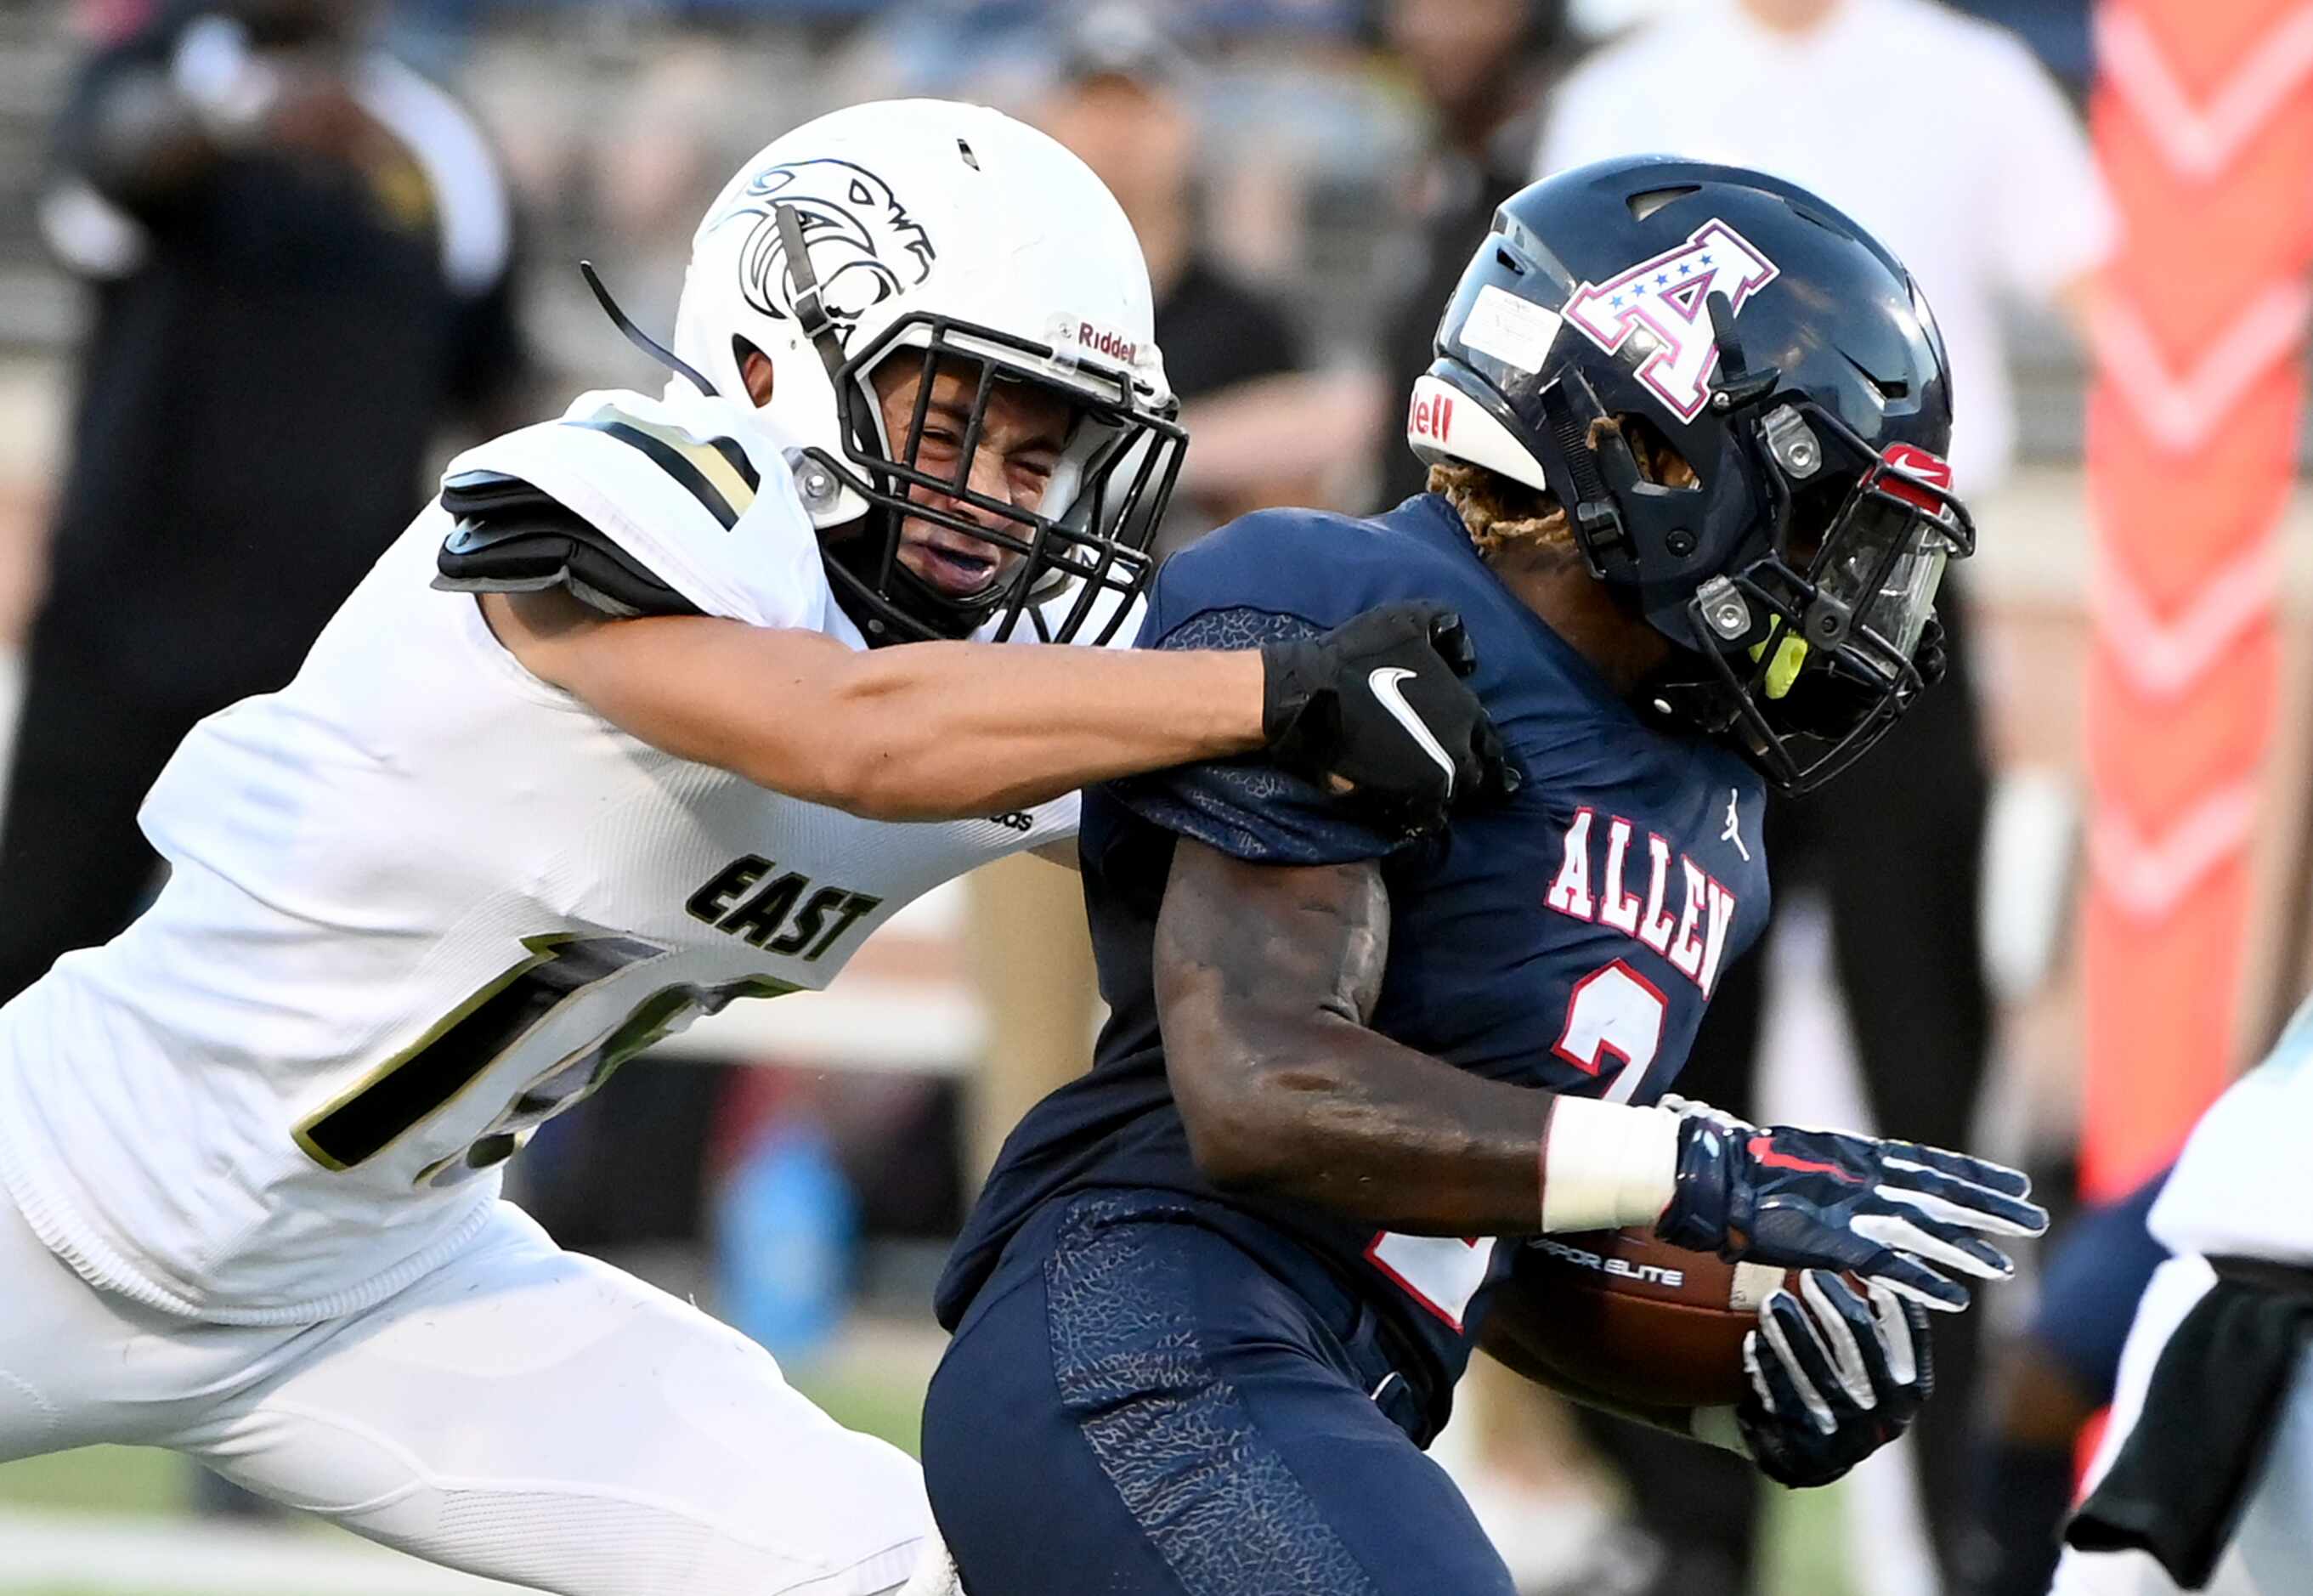 Plano East’s Holden Stokes tackles Allen’s Jaylen Jenkins (2) in the first half during a...